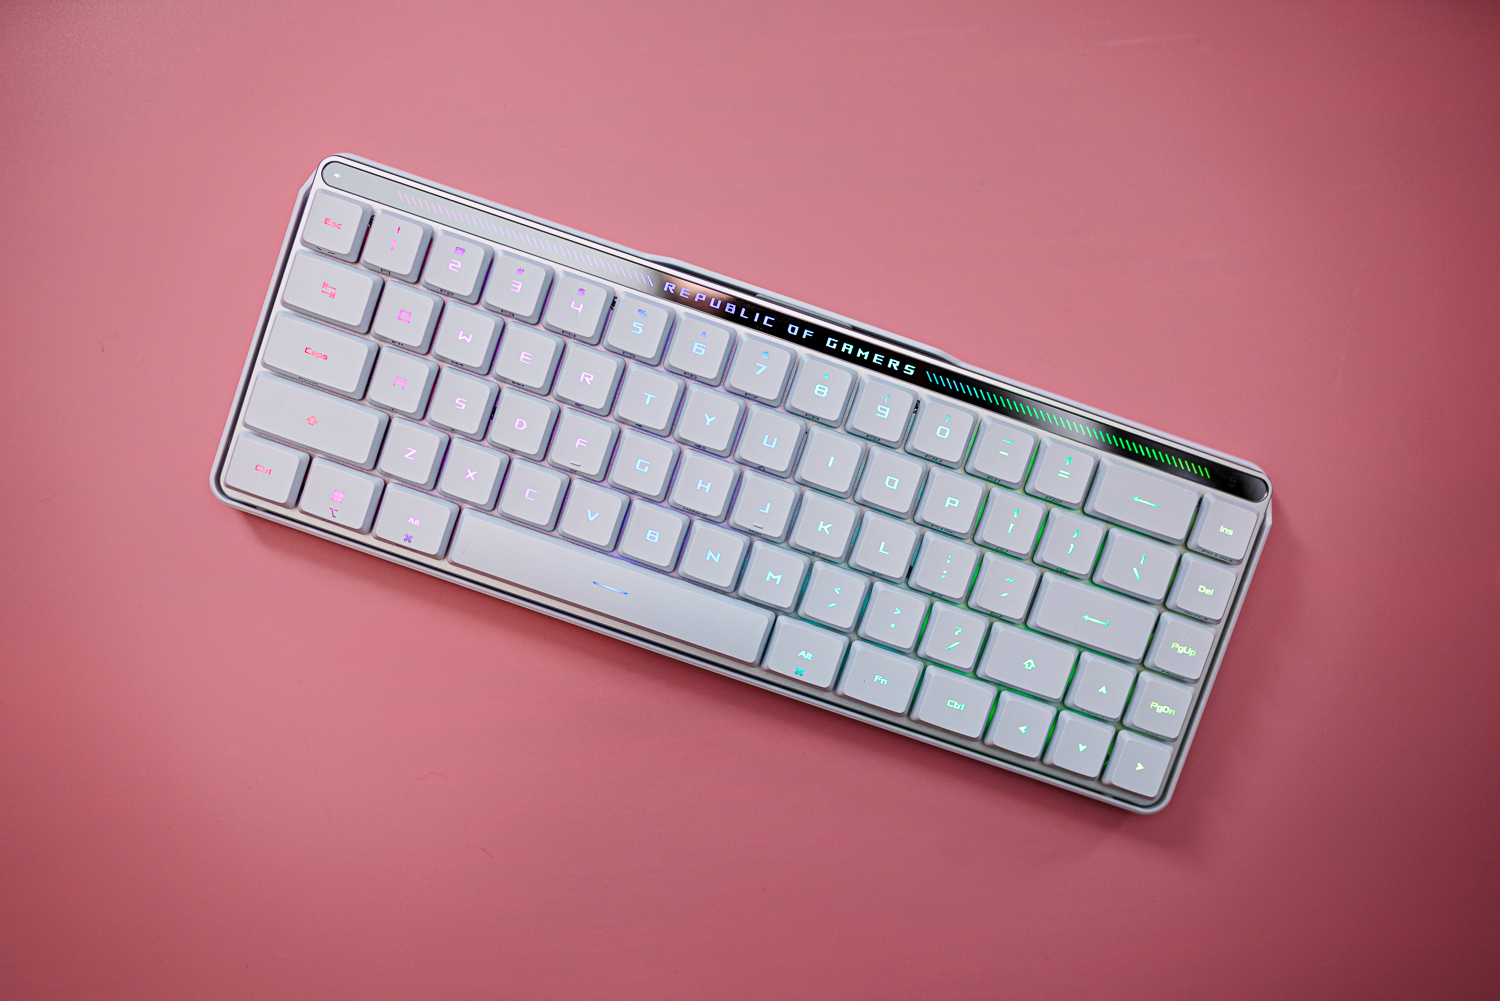 The Asus ROG Falchion RX LP keyboard on a pink background.